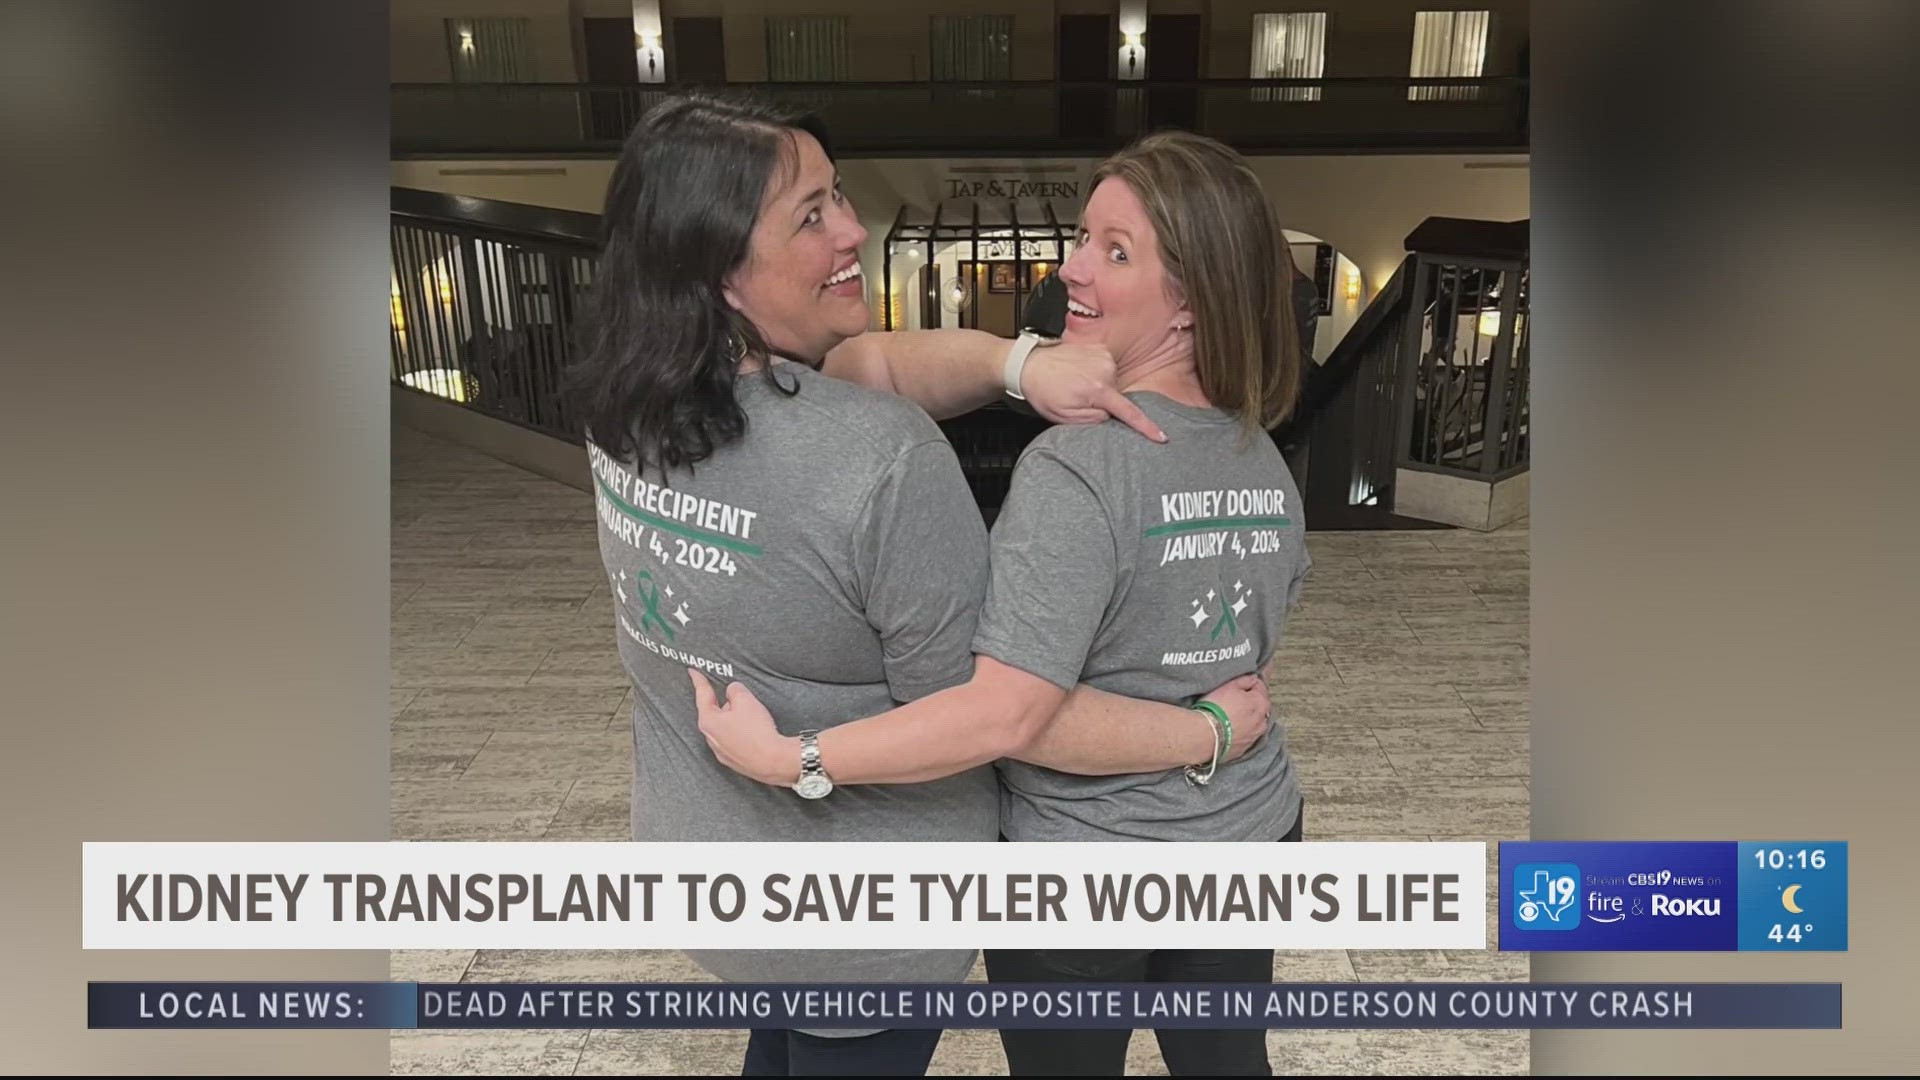 Kari Bonner's life changed after being diagnosed with a rare disease leaving her with kidney failure. Thanks to her cousin being a donor, she can continue living.